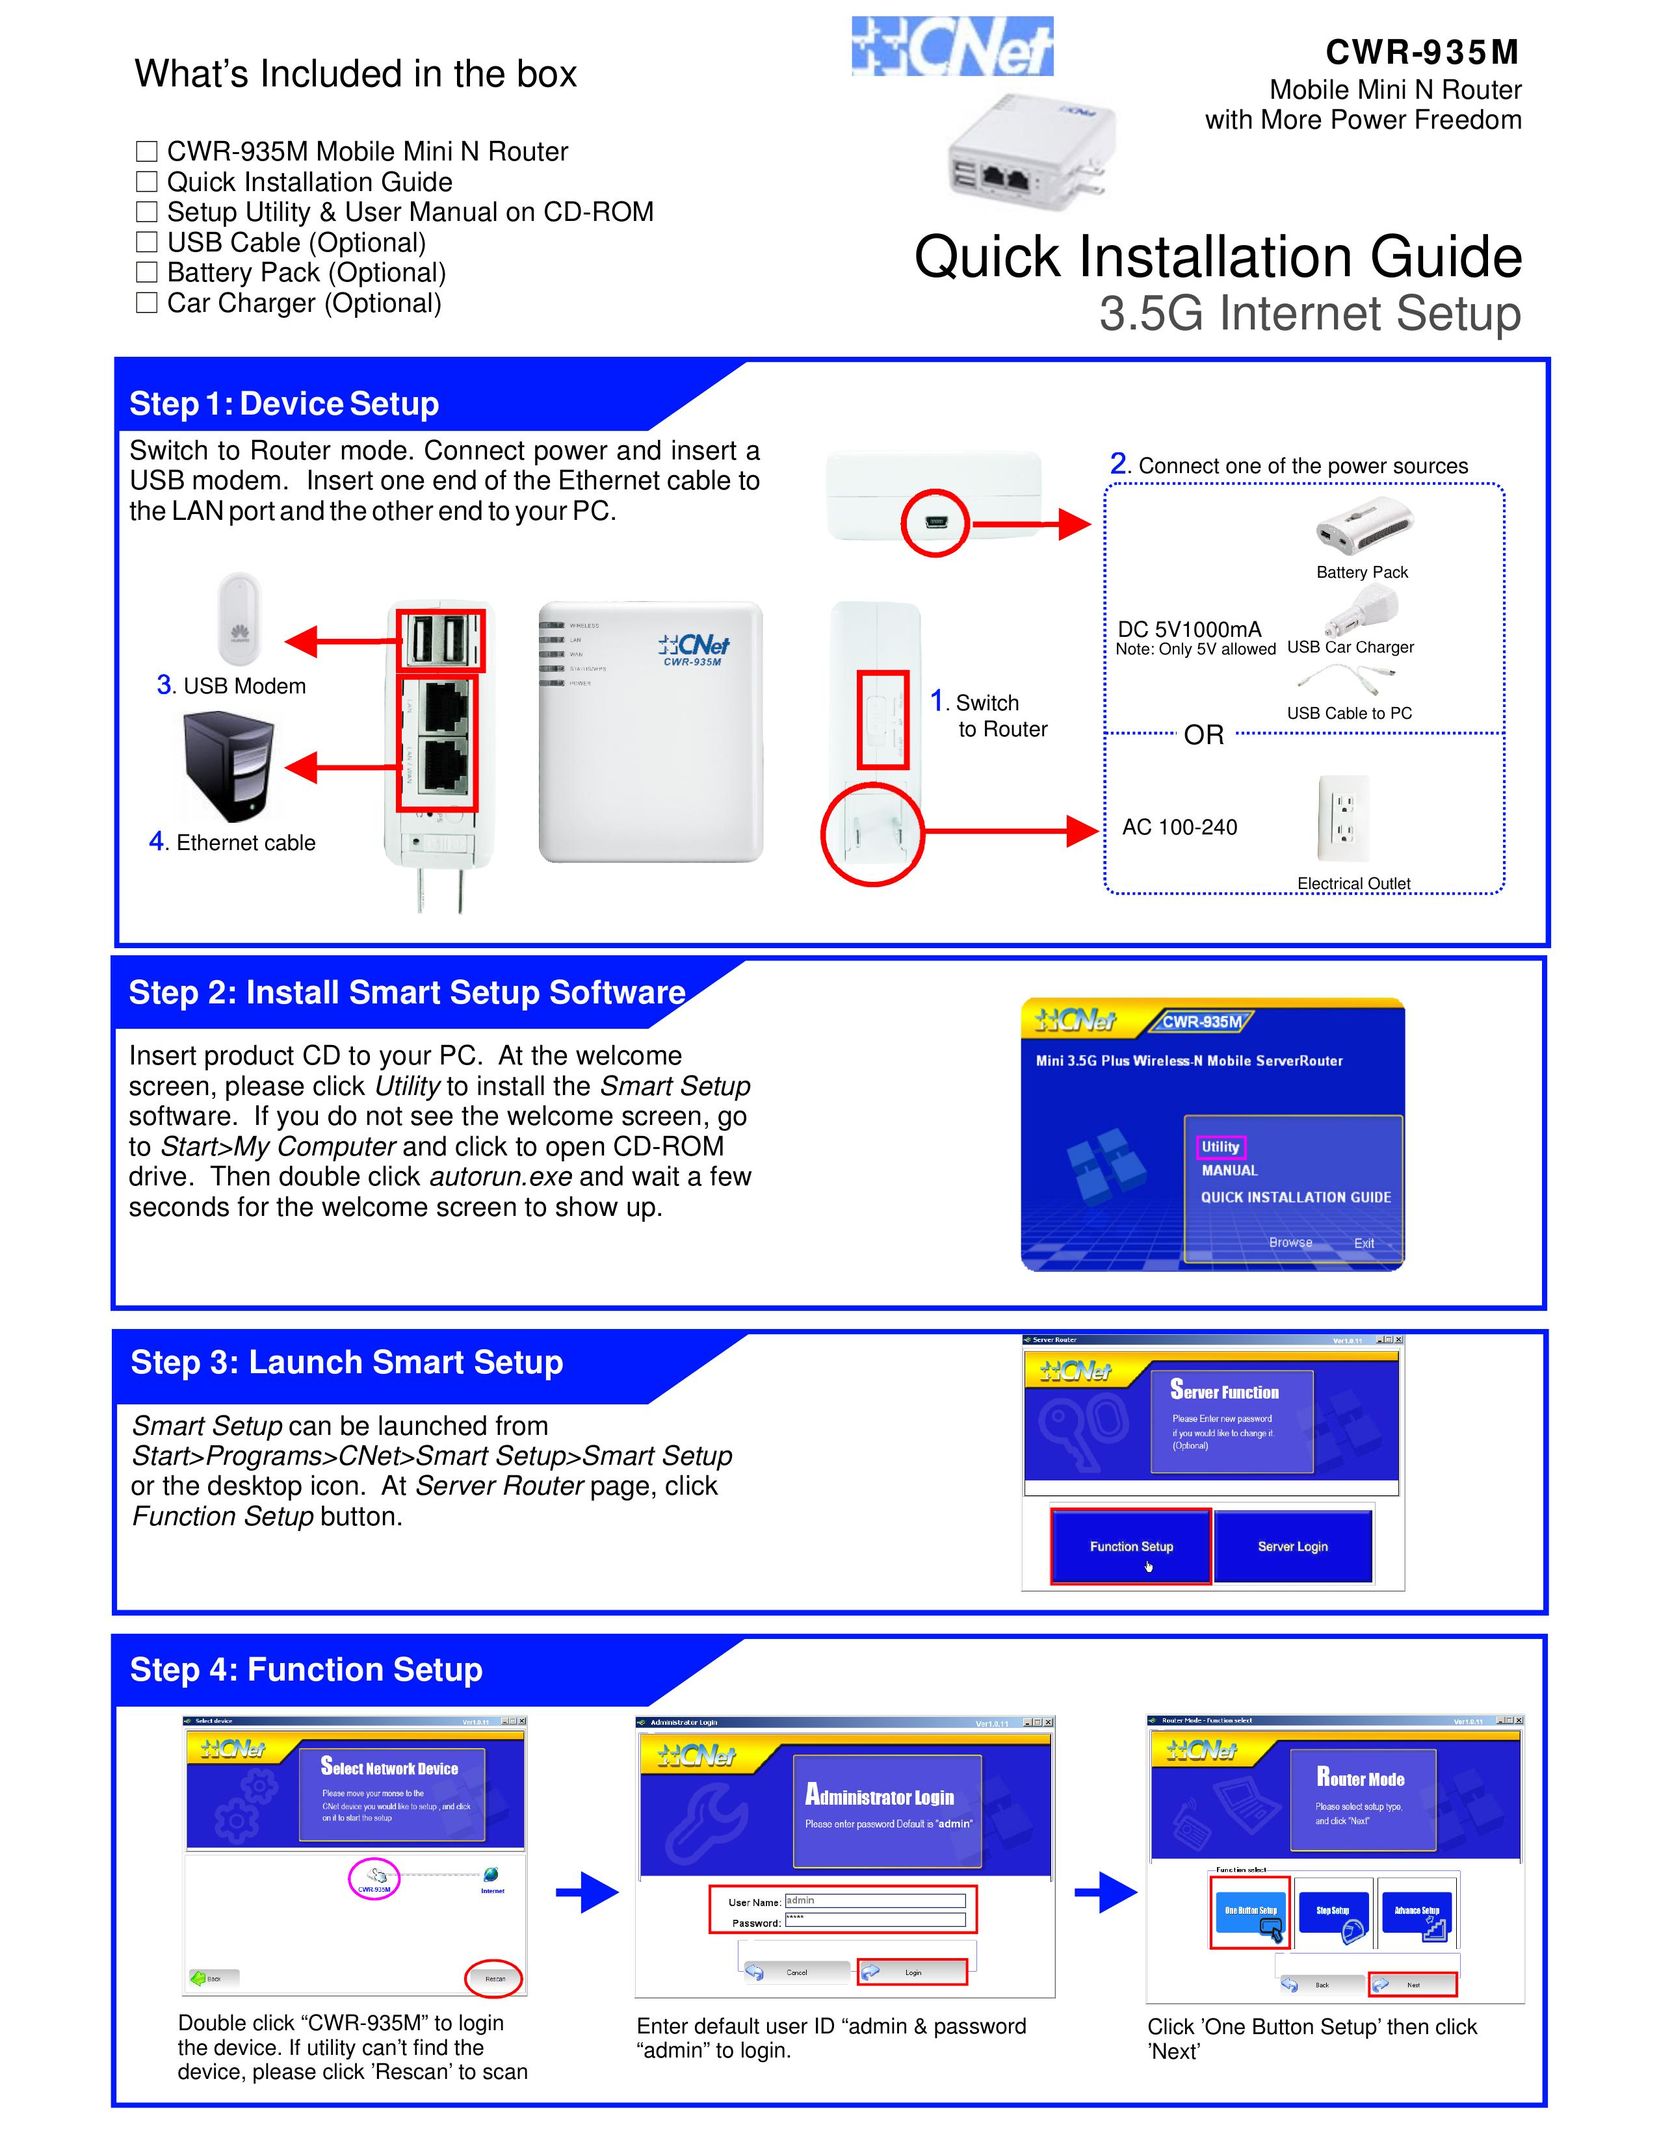 CNET CWR-935M Network Router User Manual